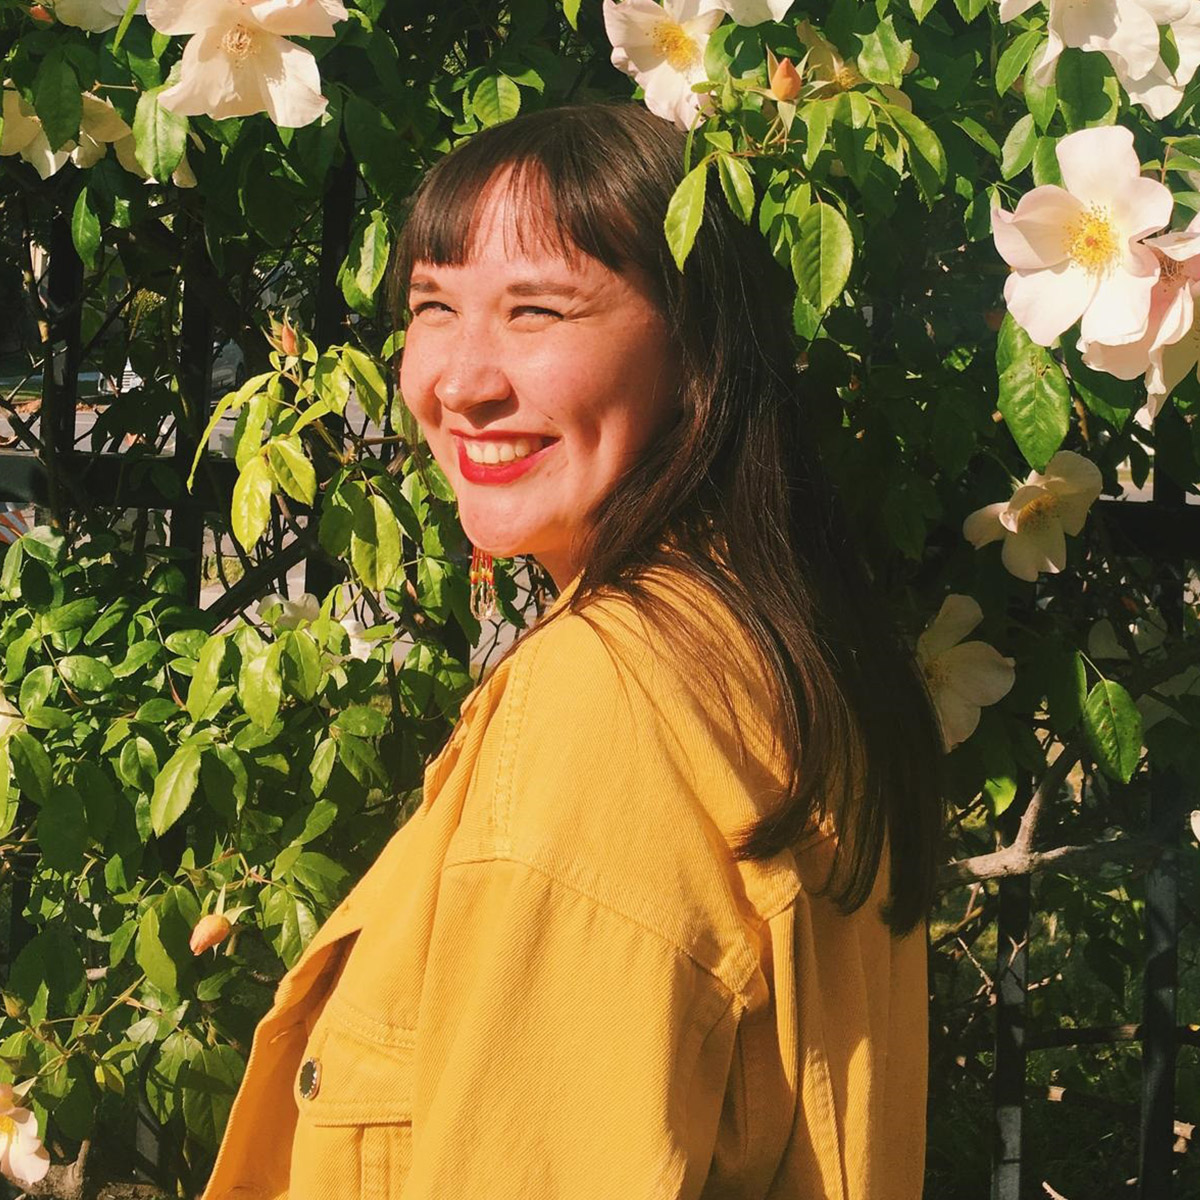 Chantal Jung color portrait. Chantal is Nunatsiavut Inuk and German and is posed outside amongst flowering trees and plants. She is turned to the left and has her head tilted towards the camera as she smiles. She has on a bright yellow coat and red lips.